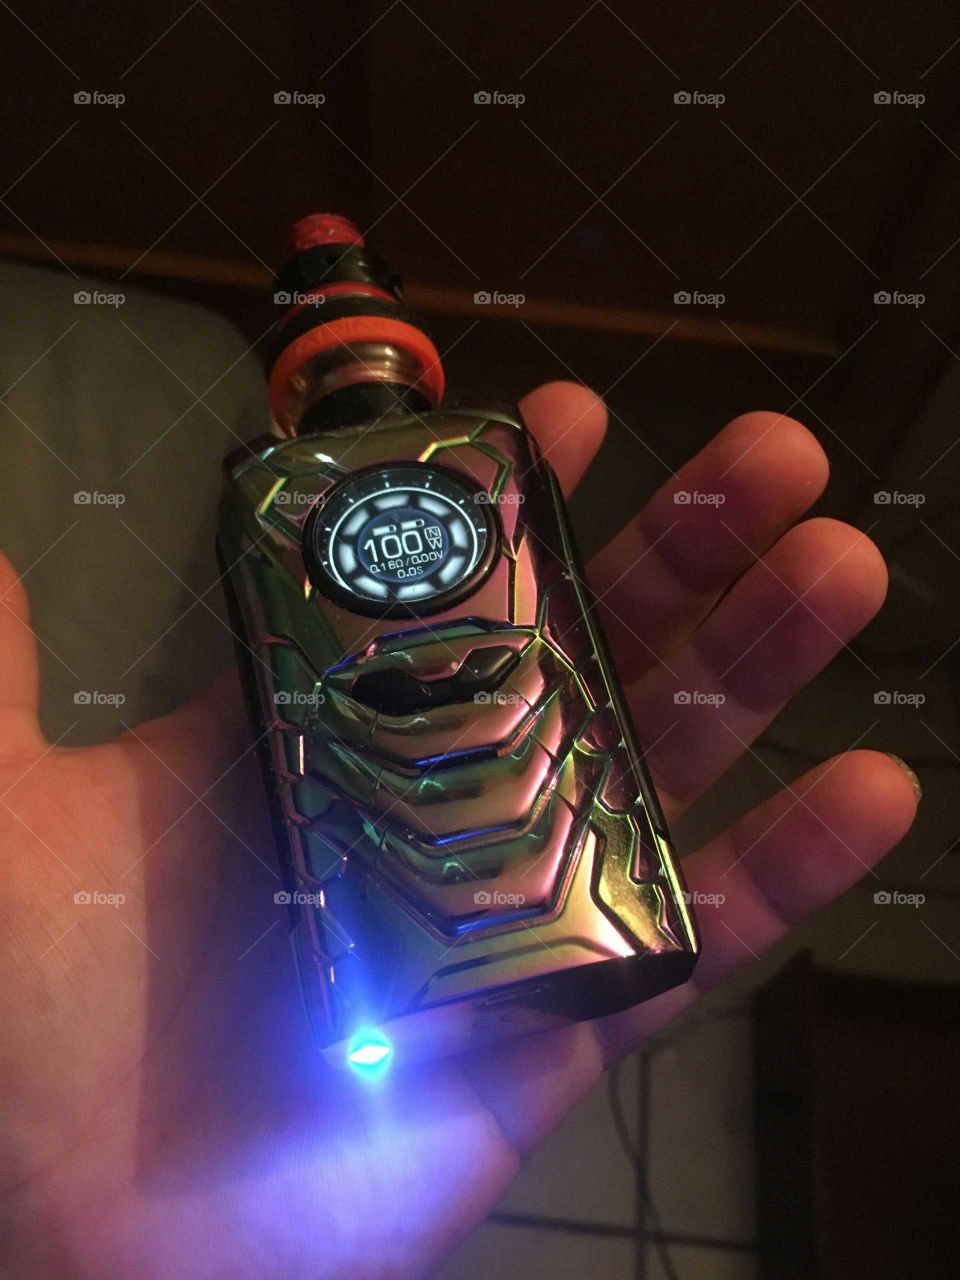 Checking out my unboxed Smok I-Priv 230w Mod (voice activation, changing bottom led light, multiple battery types capable, magnetic back cover)